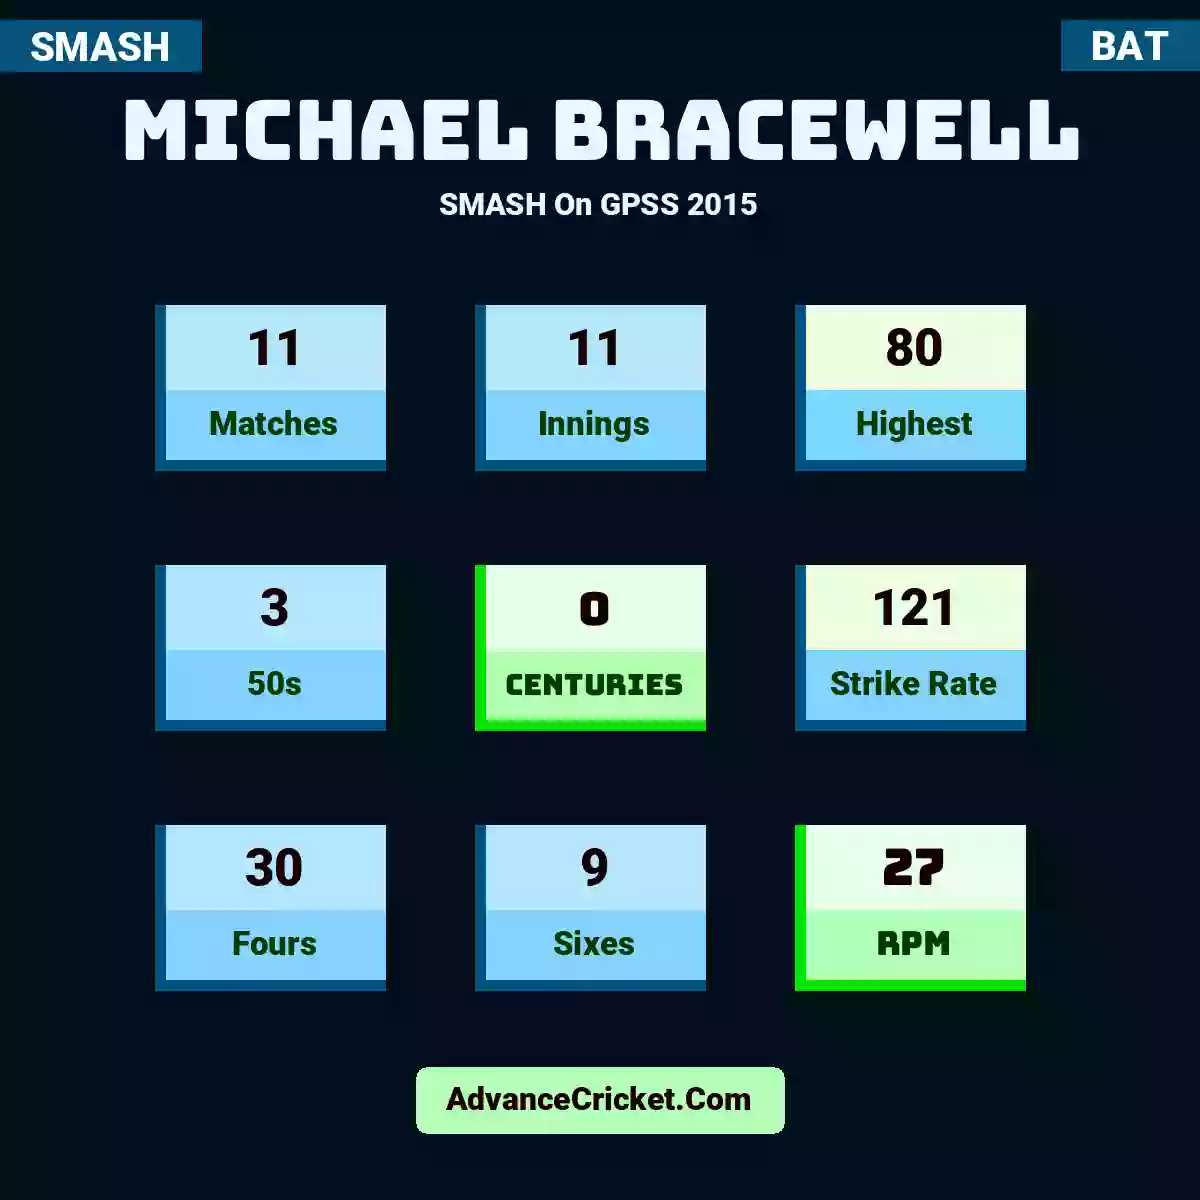 Michael Bracewell SMASH  On GPSS 2015, Michael Bracewell played 11 matches, scored 80 runs as highest, 3 half-centuries, and 0 centuries, with a strike rate of 121. M.Bracewell hit 30 fours and 9 sixes, with an RPM of 27.